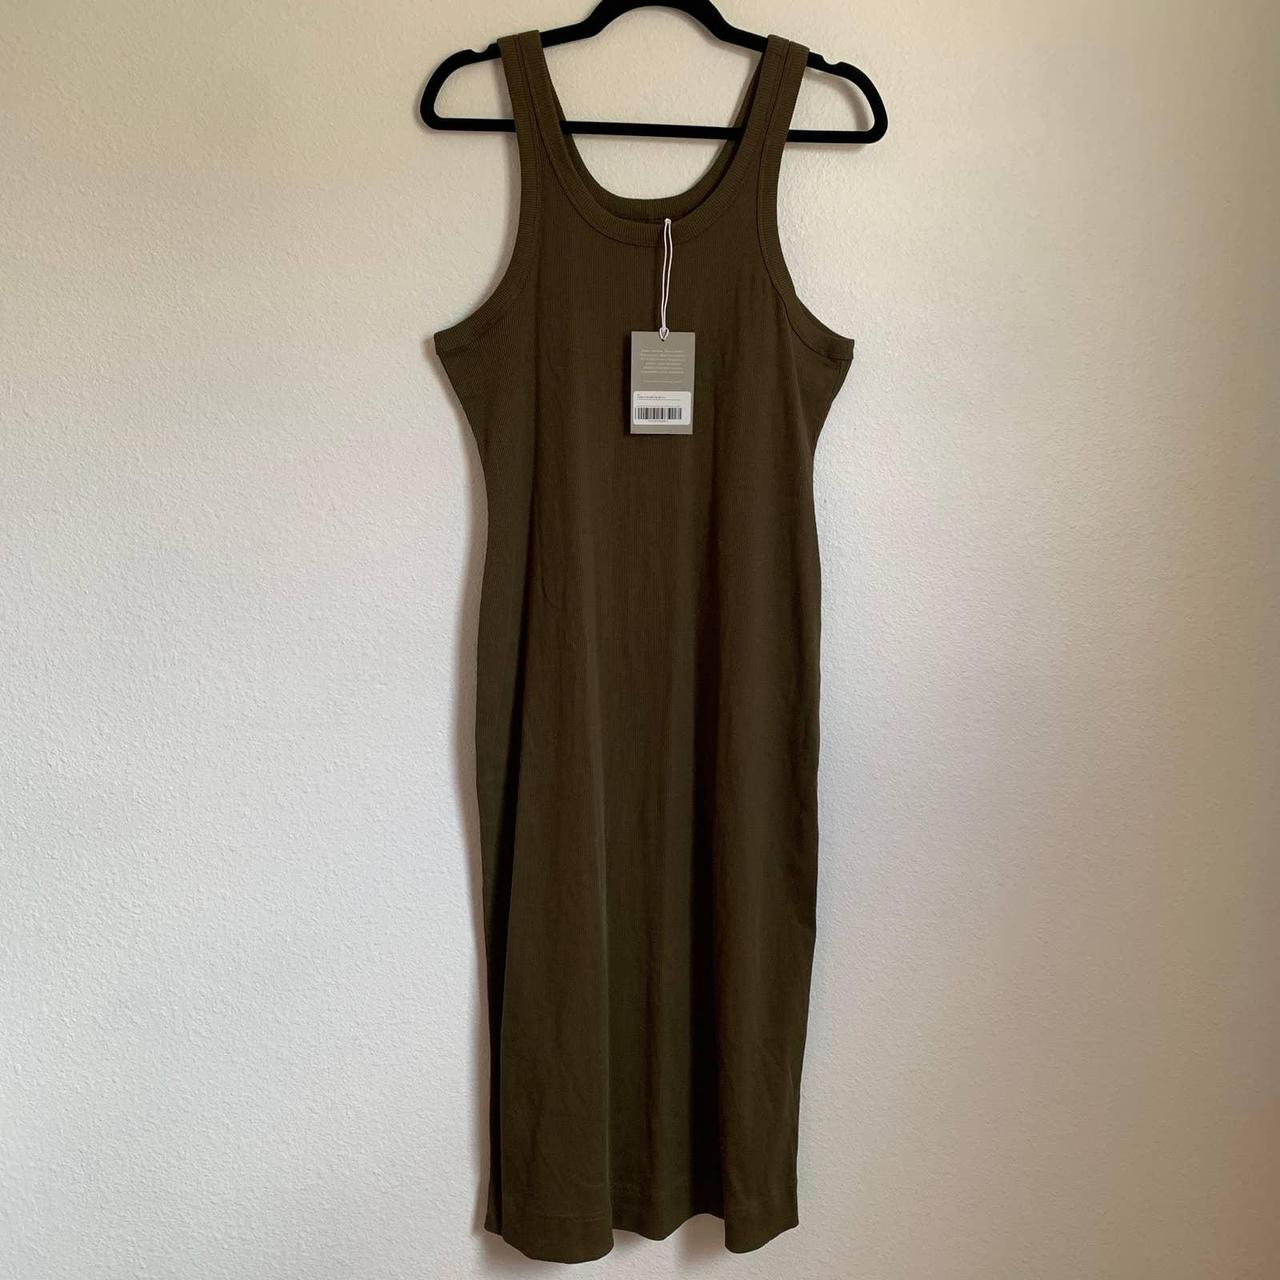 Everlane NWT The Ribbed Tank Dress in Beech Size L - $60 New With